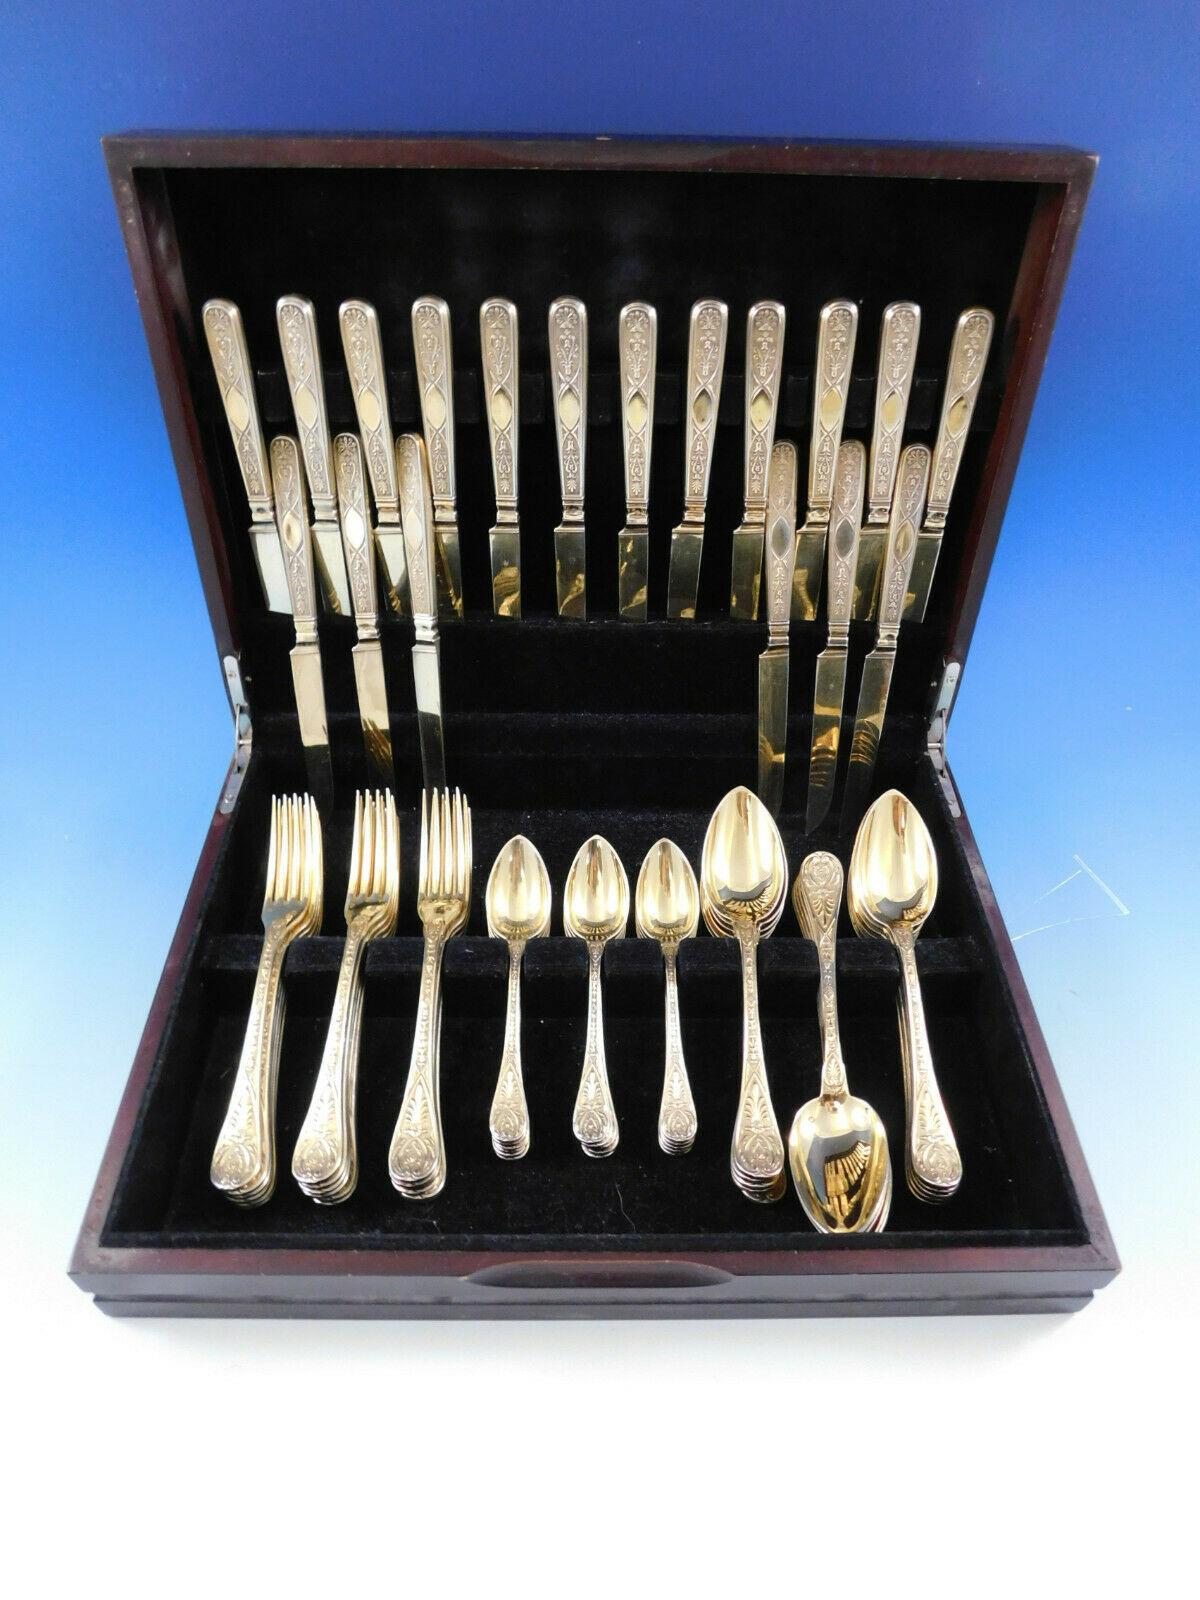 Very fine French vermeil 950 silver dessert set by Andre Aucoc, Paris, circa 1887-1911, 71 pieces total.
This set includes:

18 dessert knives, pointed blades, hollow handle all-sterling, 8 1/8